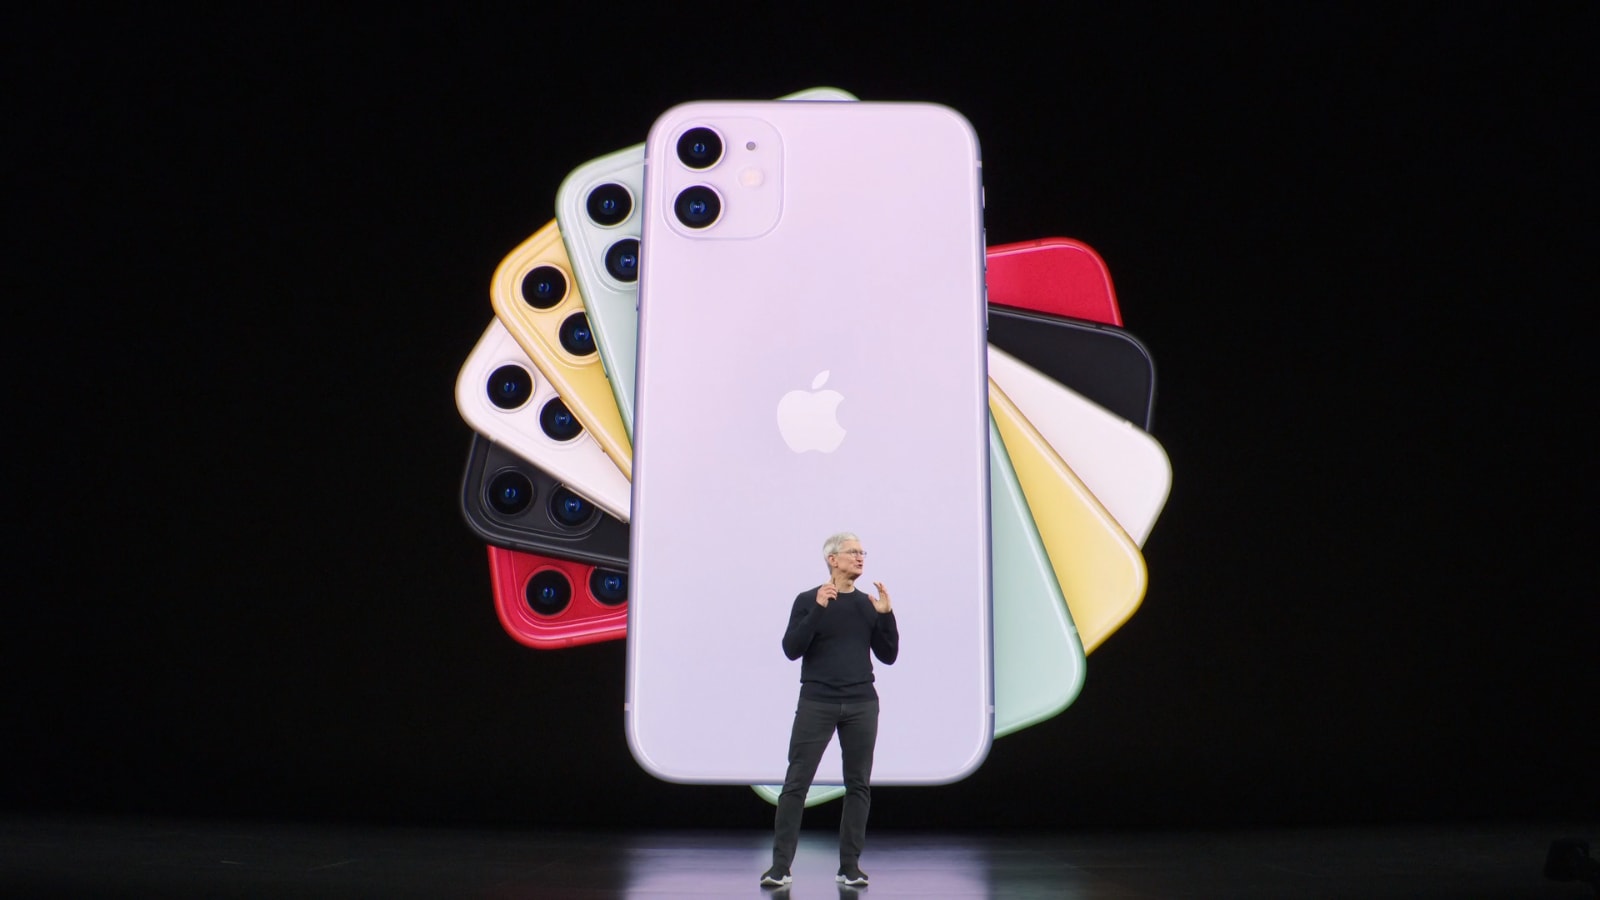 iPhone 11 top feature: Price